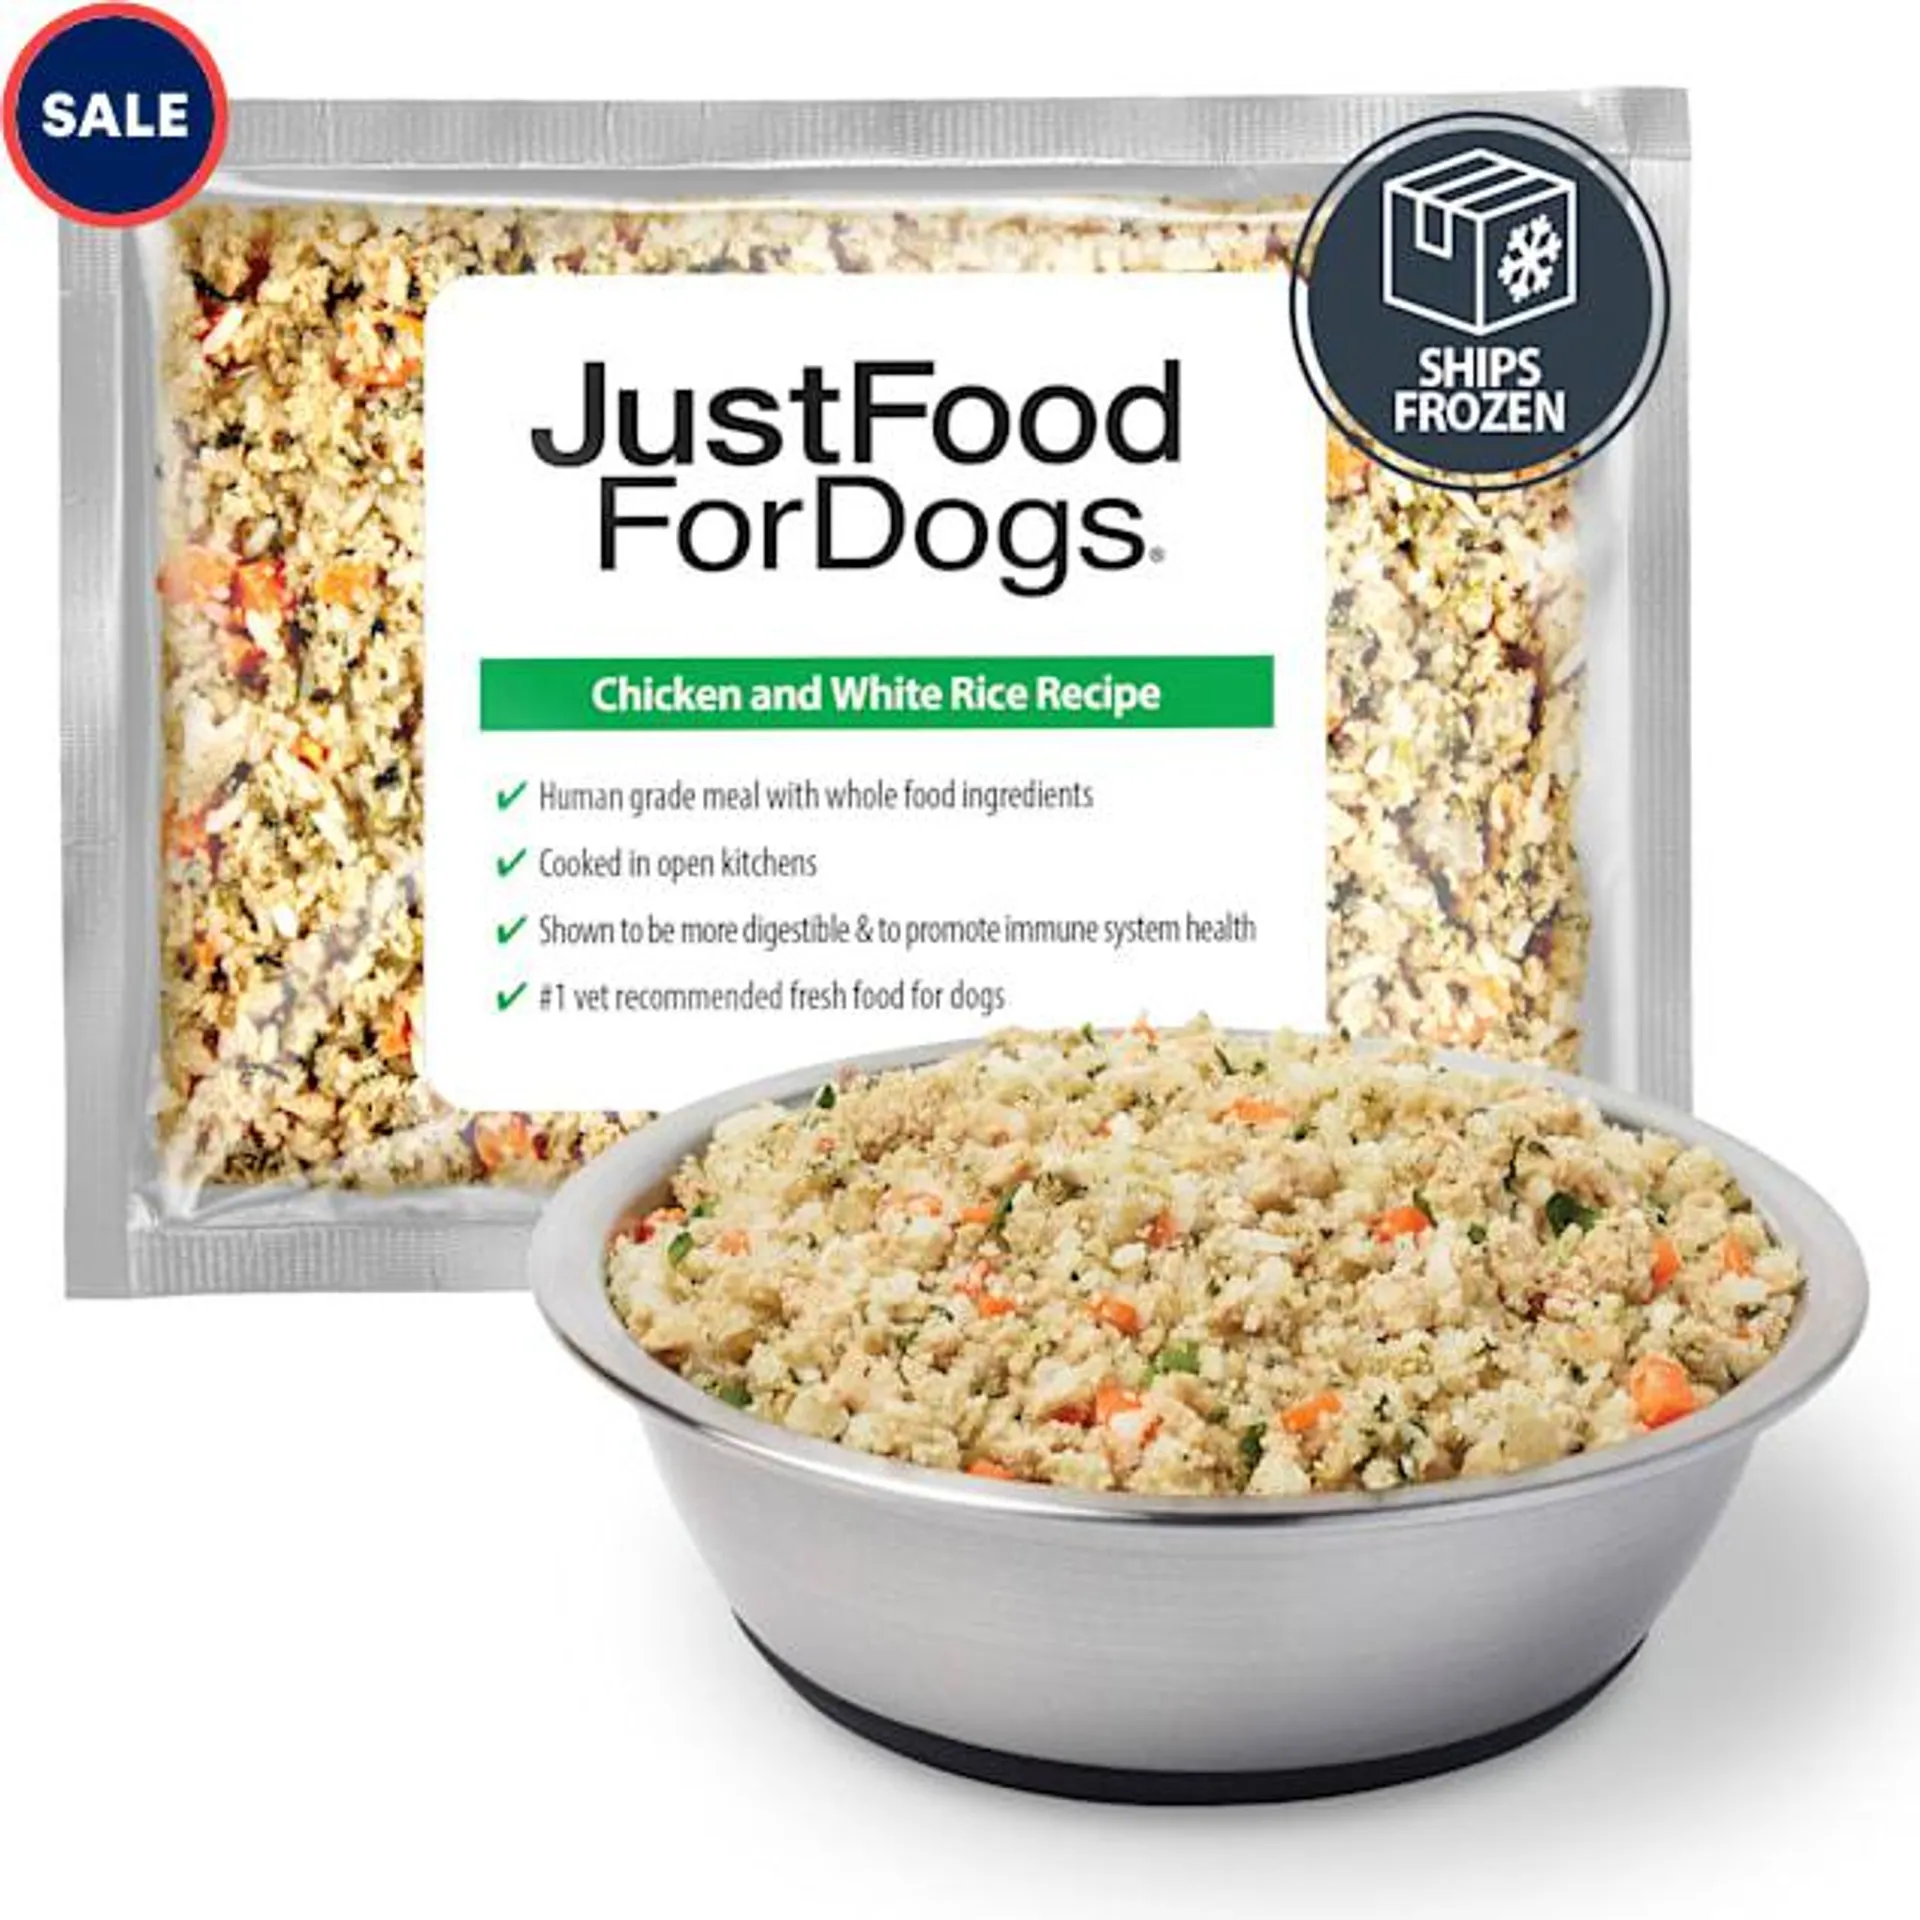 JustFoodForDogs Daily Diets Chicken & White Rice Frozen Dog Food, 72 oz., Case of 7